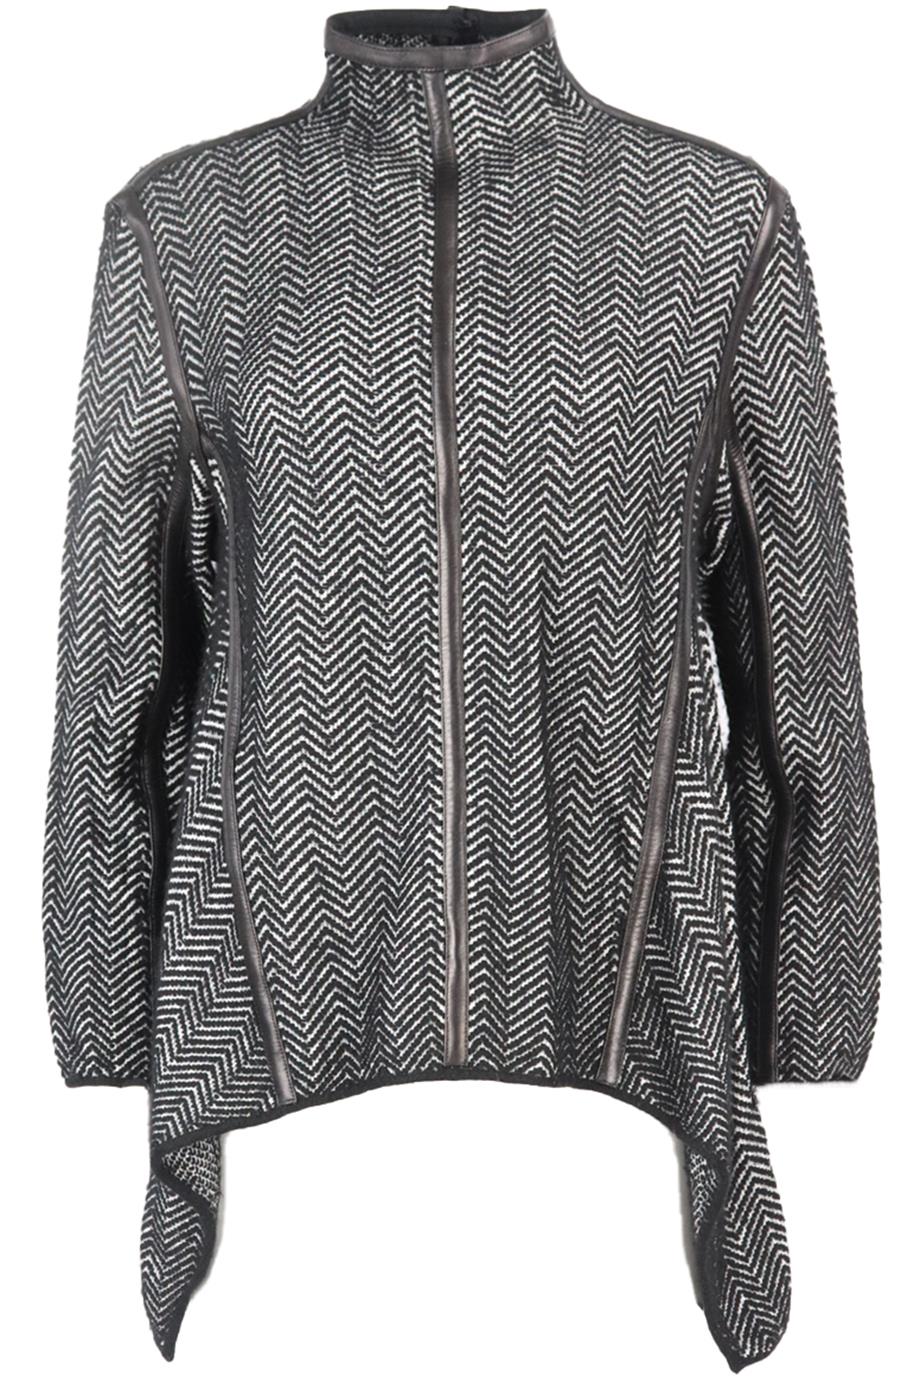 TOM FORD LEATHER TRIMMED CASHMERE BLEND SWEATER XSMALL